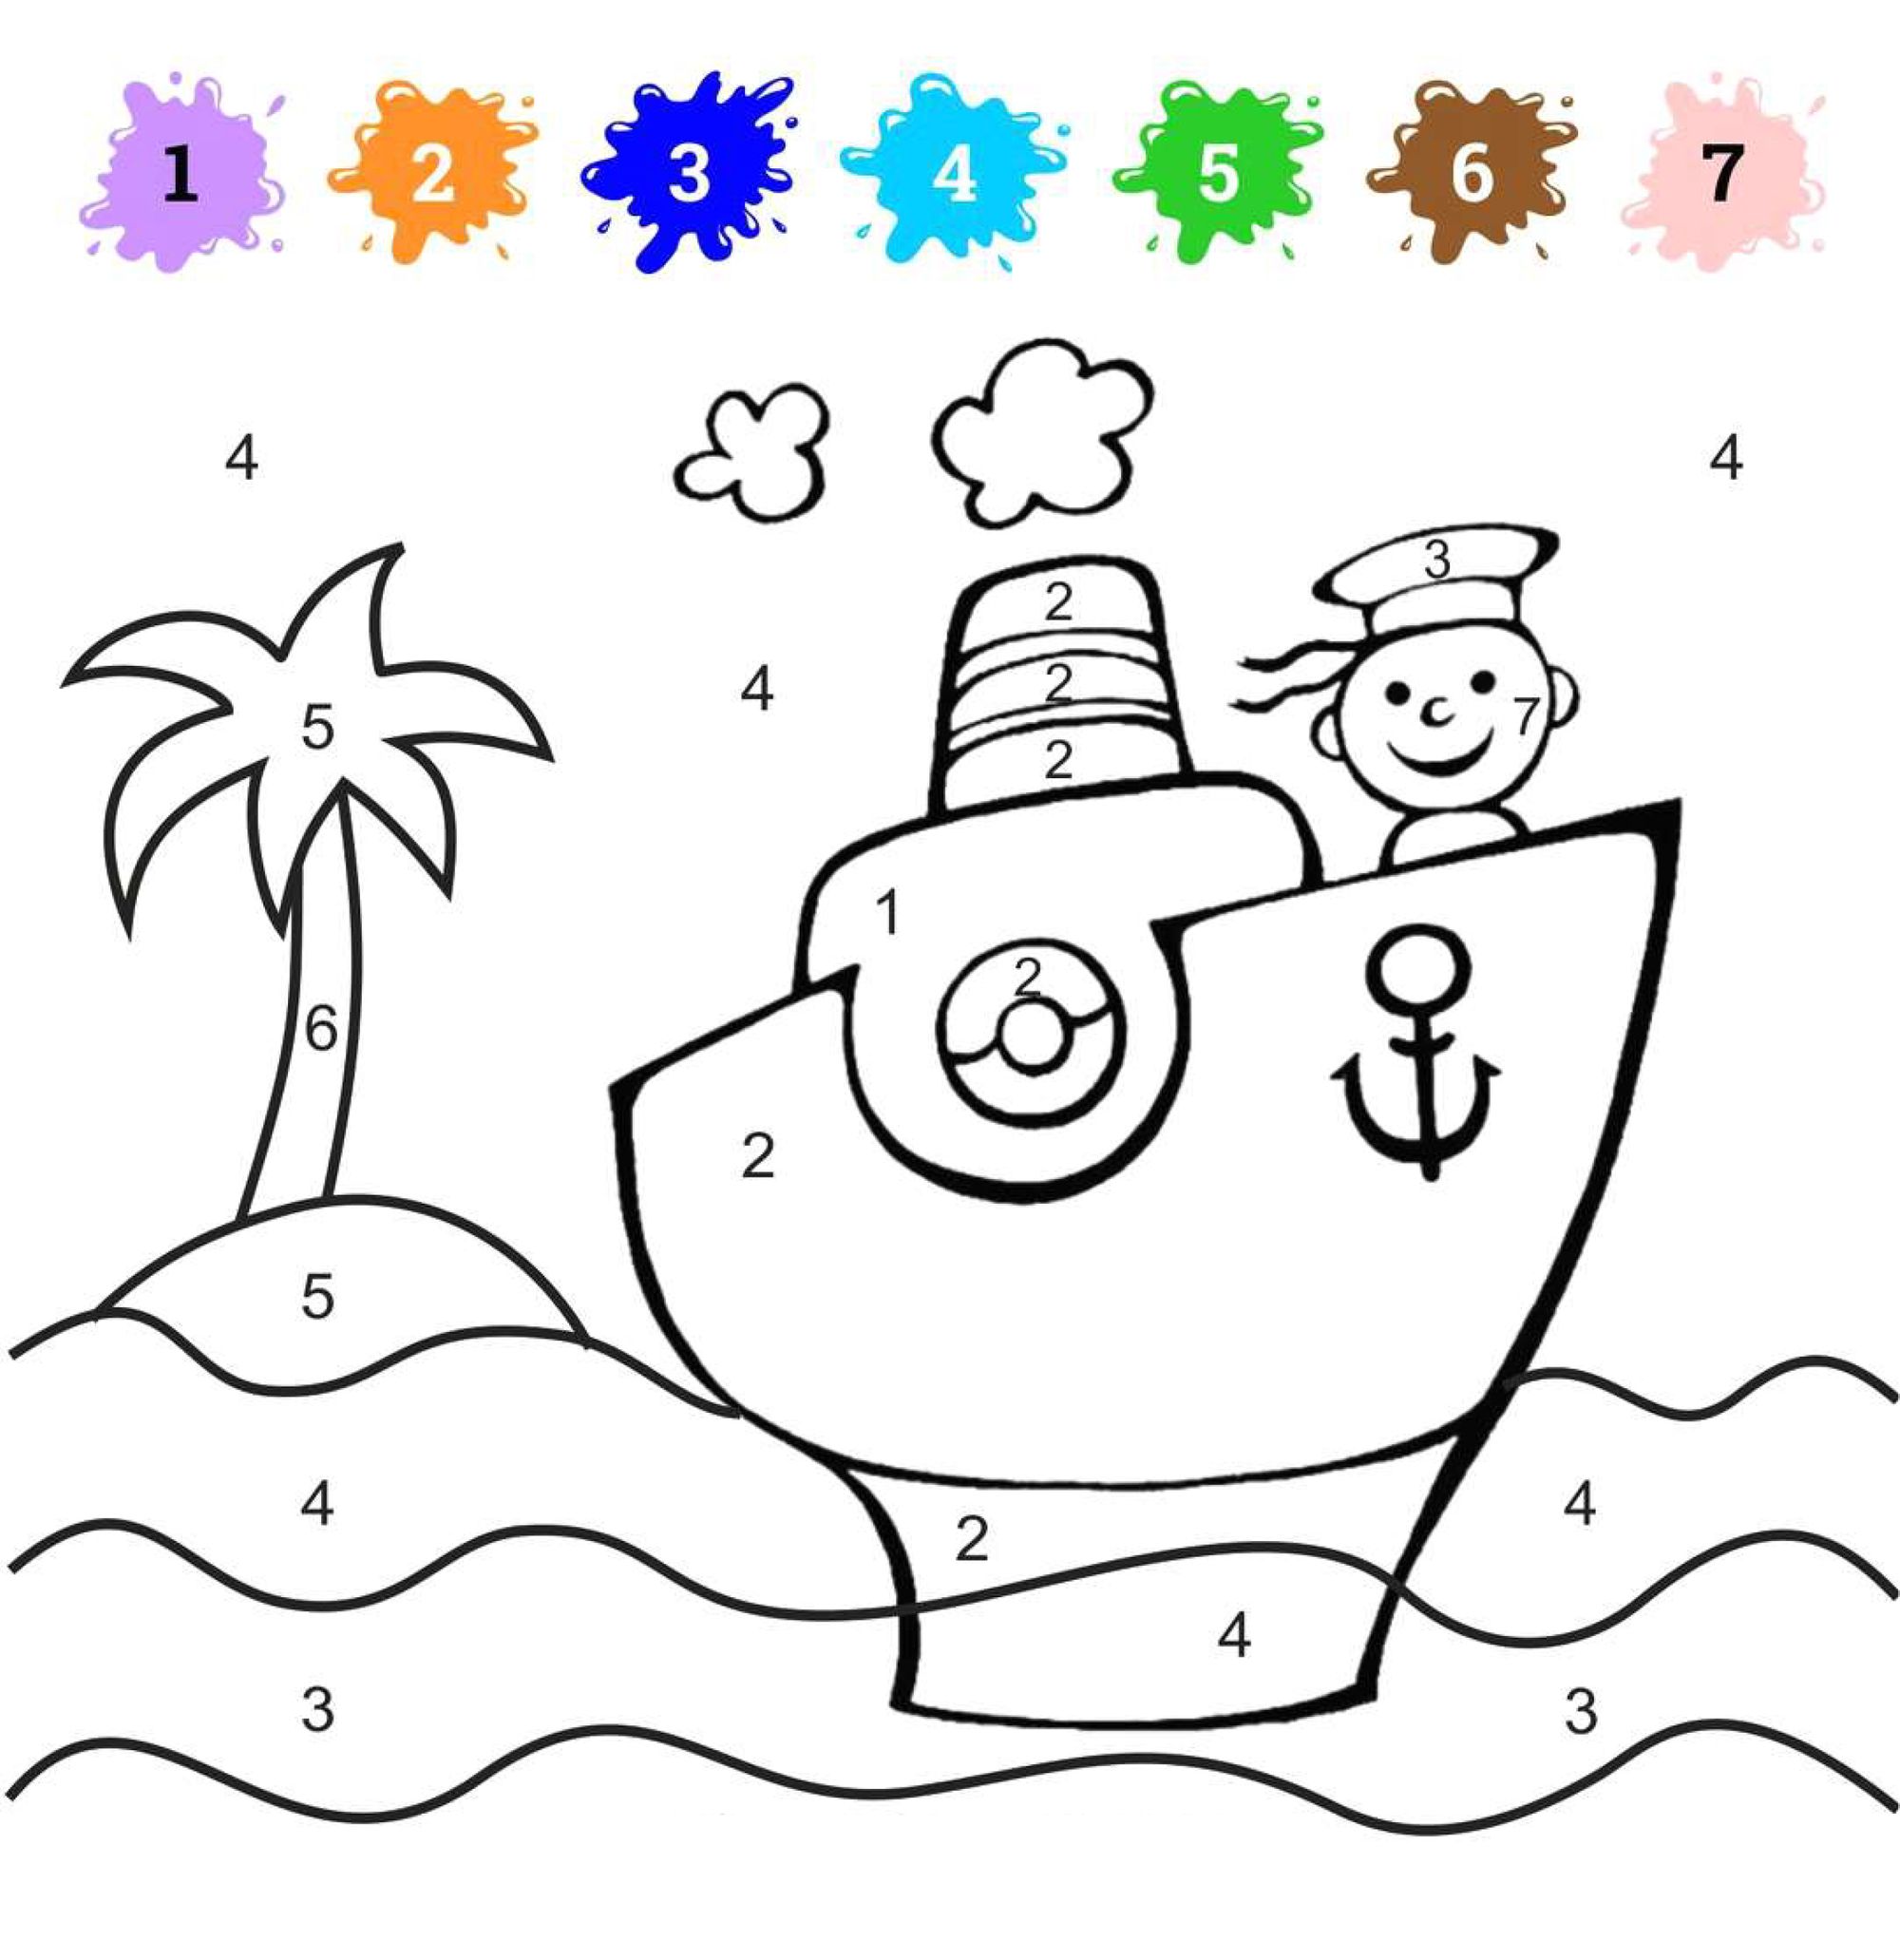 coloring-by-numbers-for-children-bf7